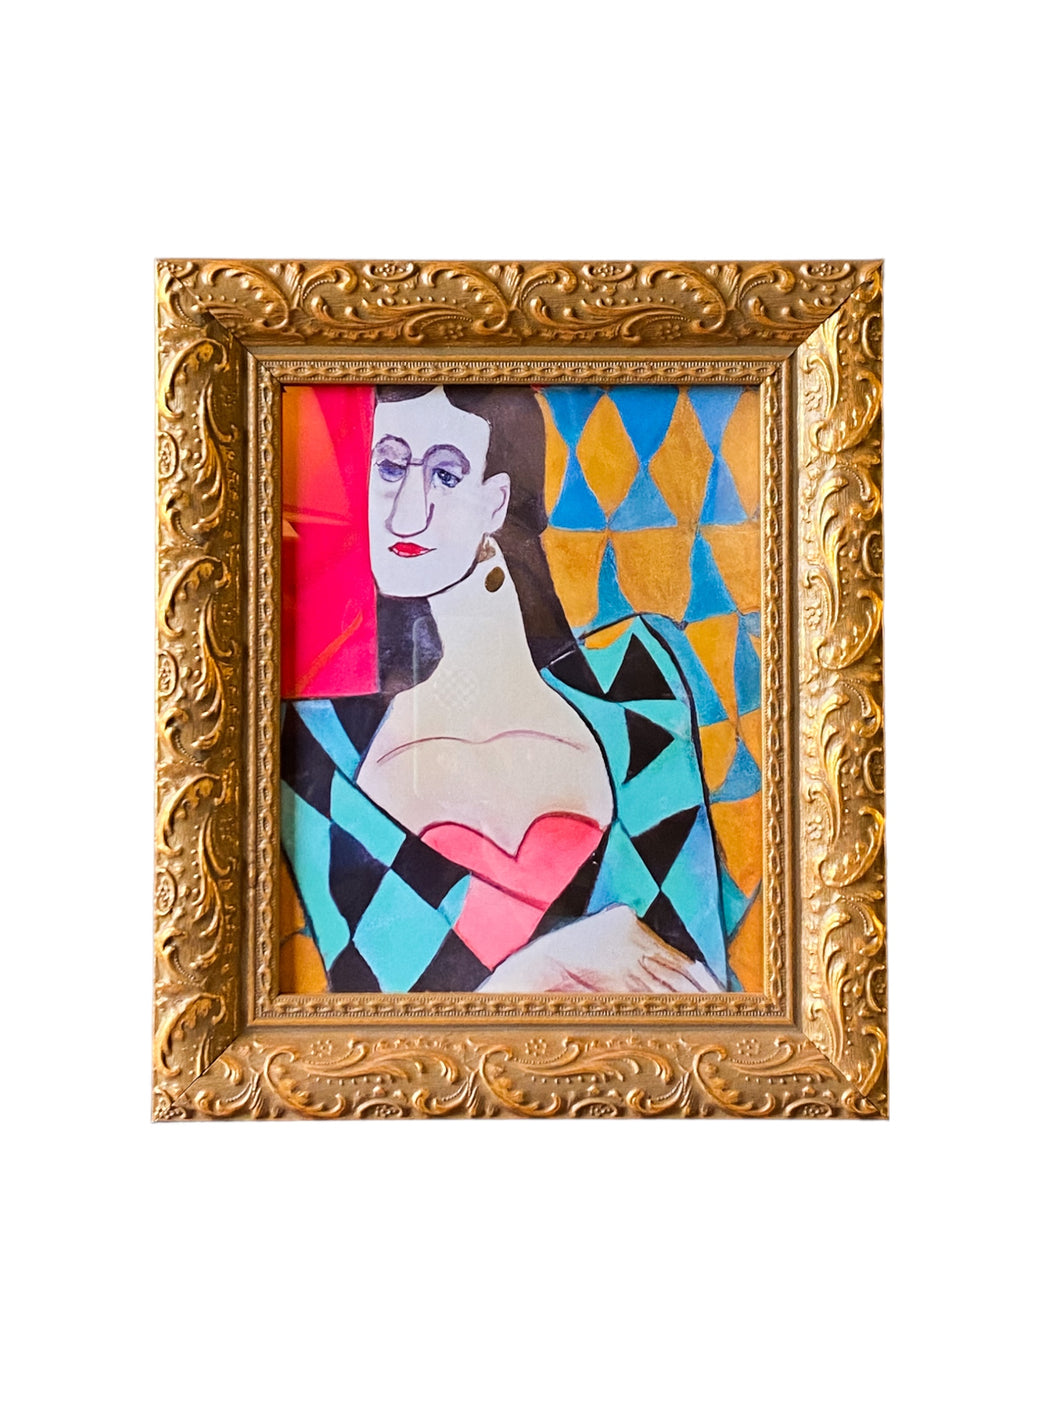 Picasso’s Resting Face Portrait in Gold Frame